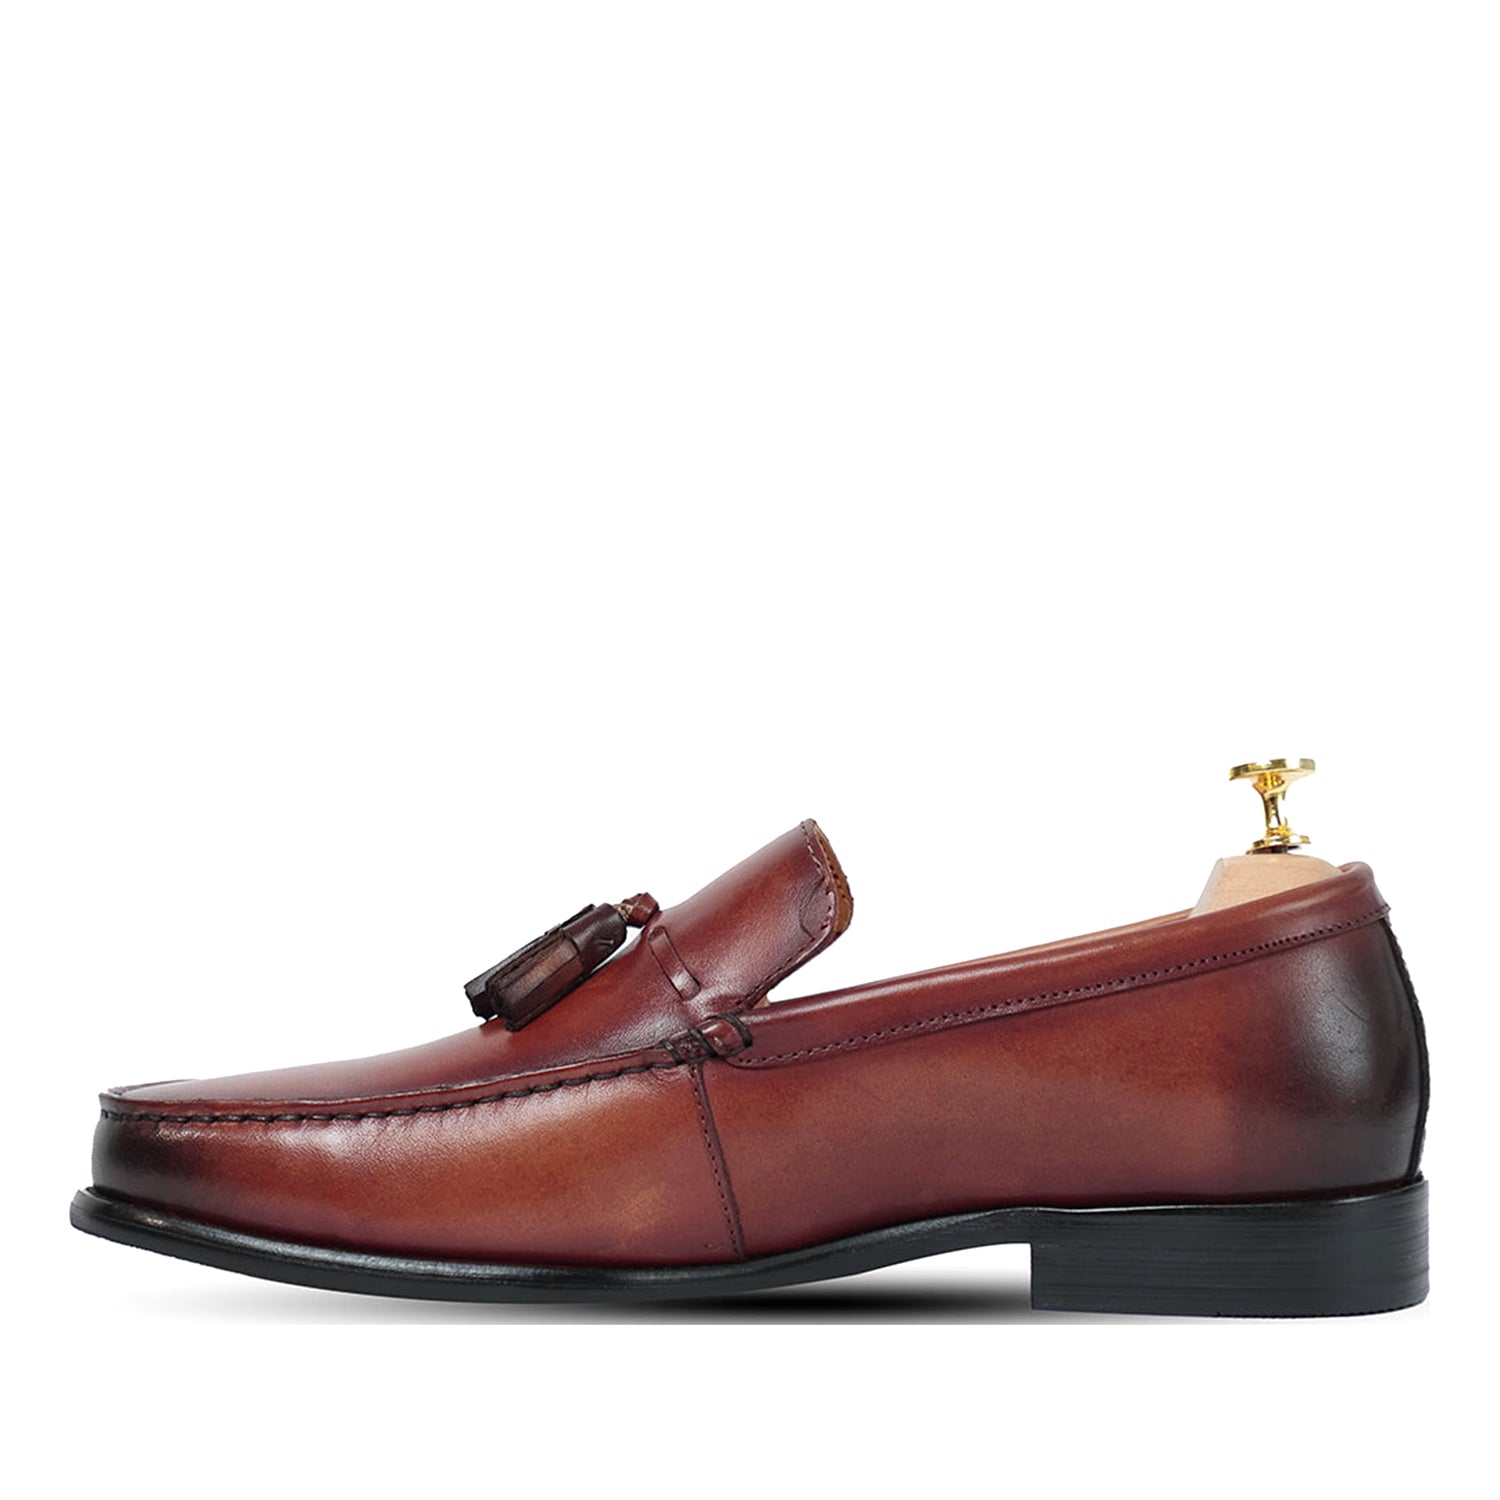 Selton Brown Loafer shoes